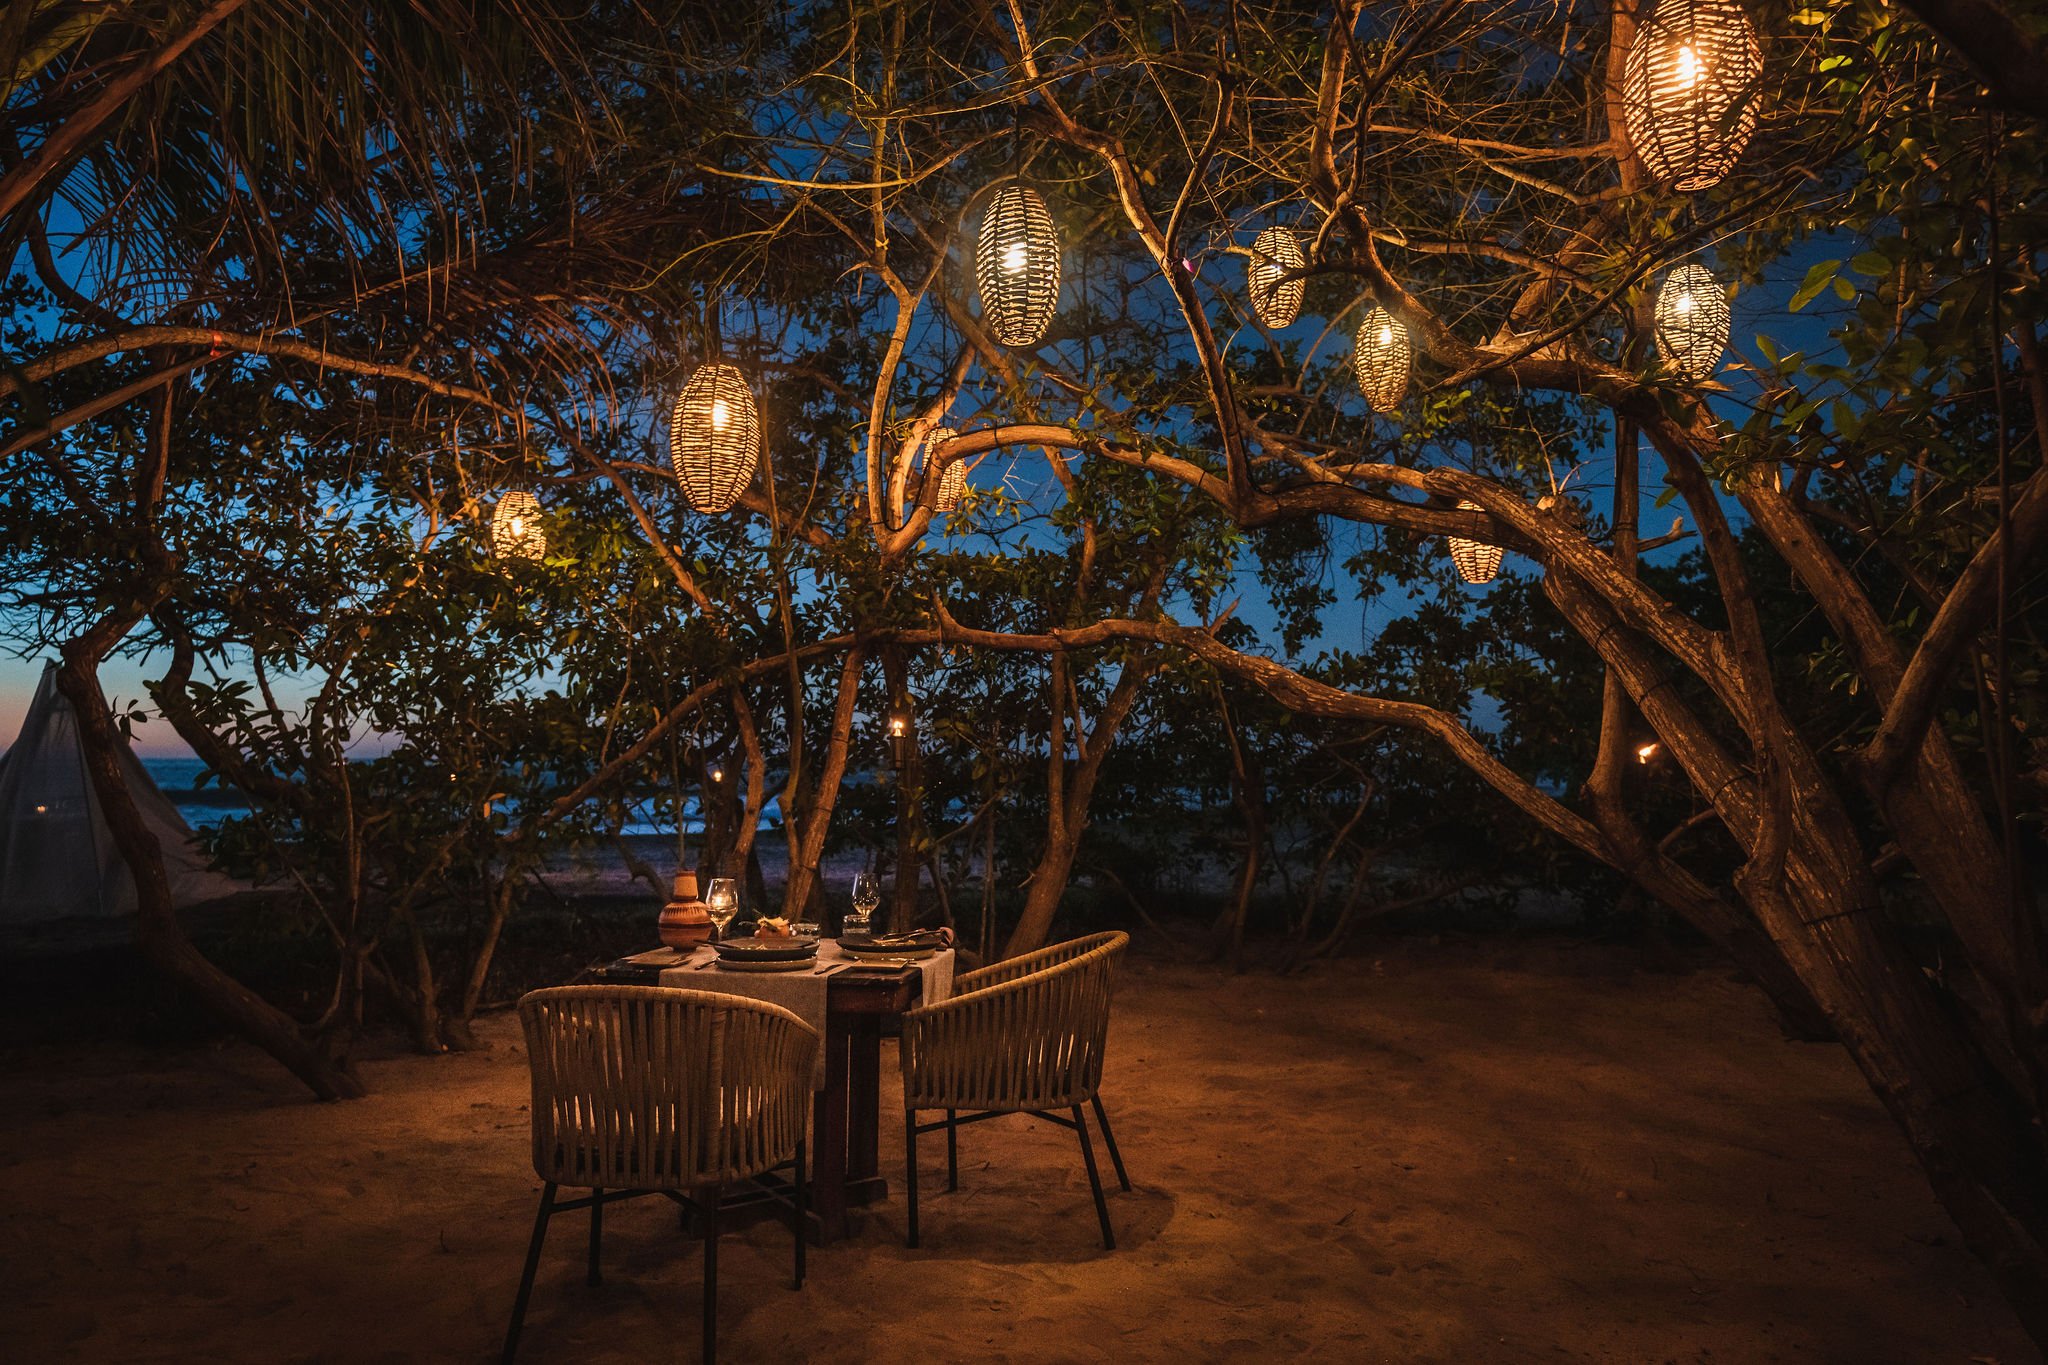 Alfresco dining setup, a well-arranged table beneath tree branches adorned with hanging lamps.